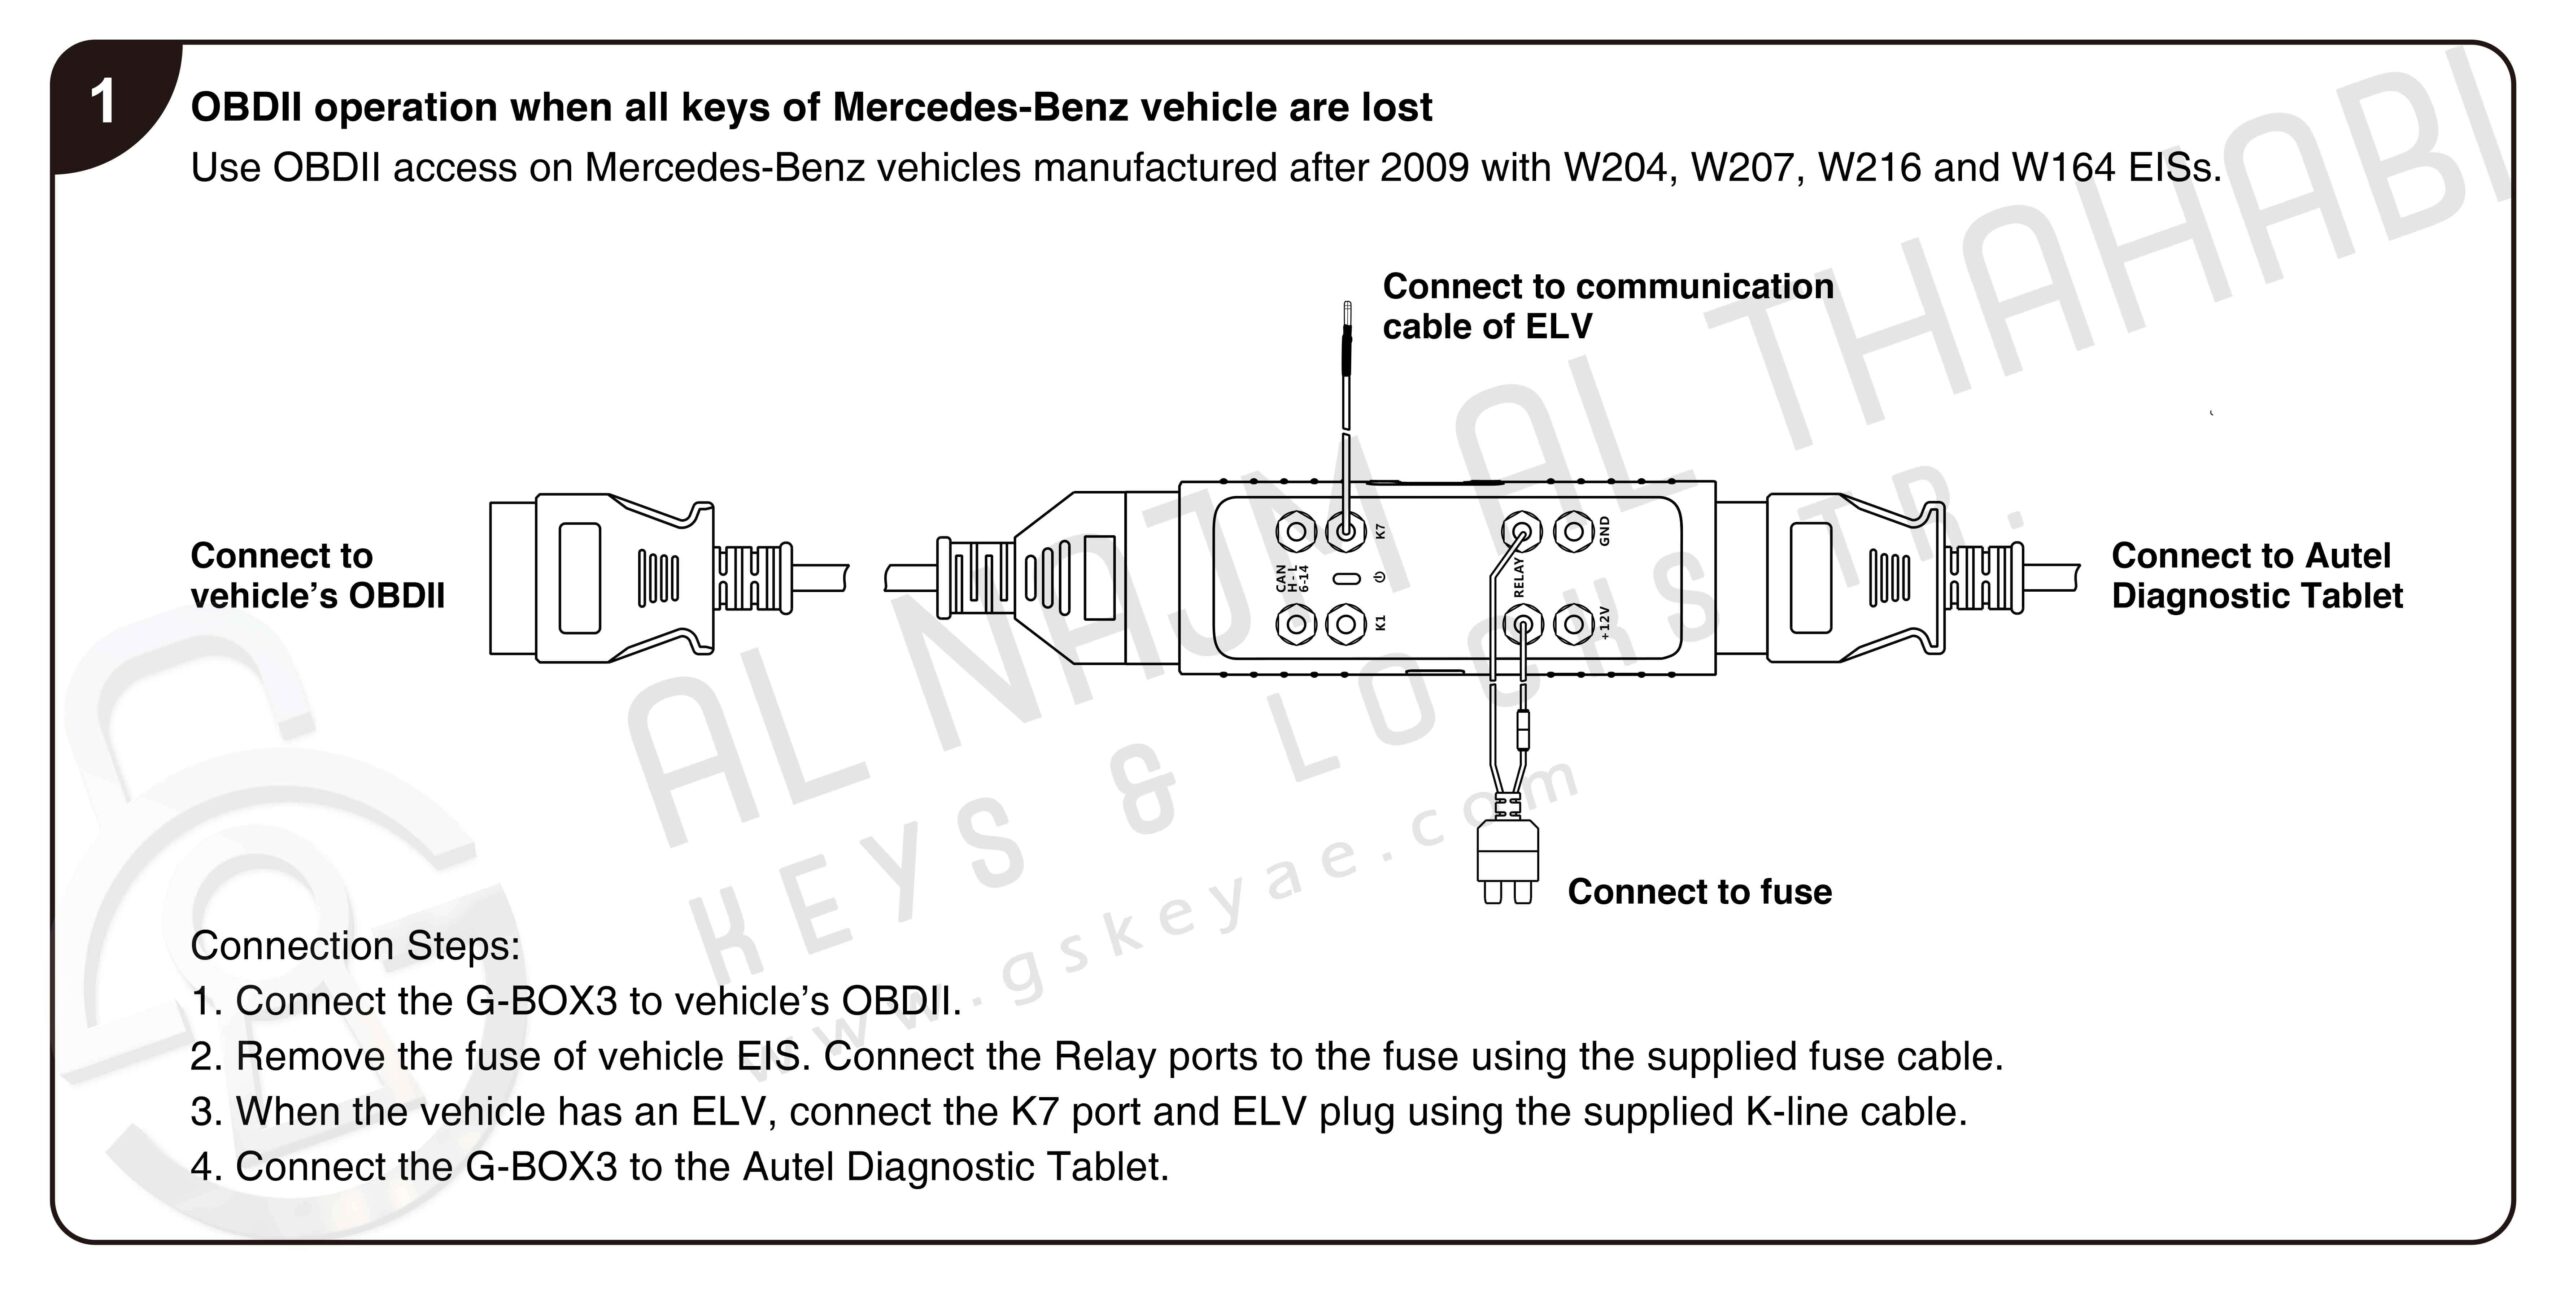 OBDII operation when all keys of Mercedes-Benz vehicle are lost